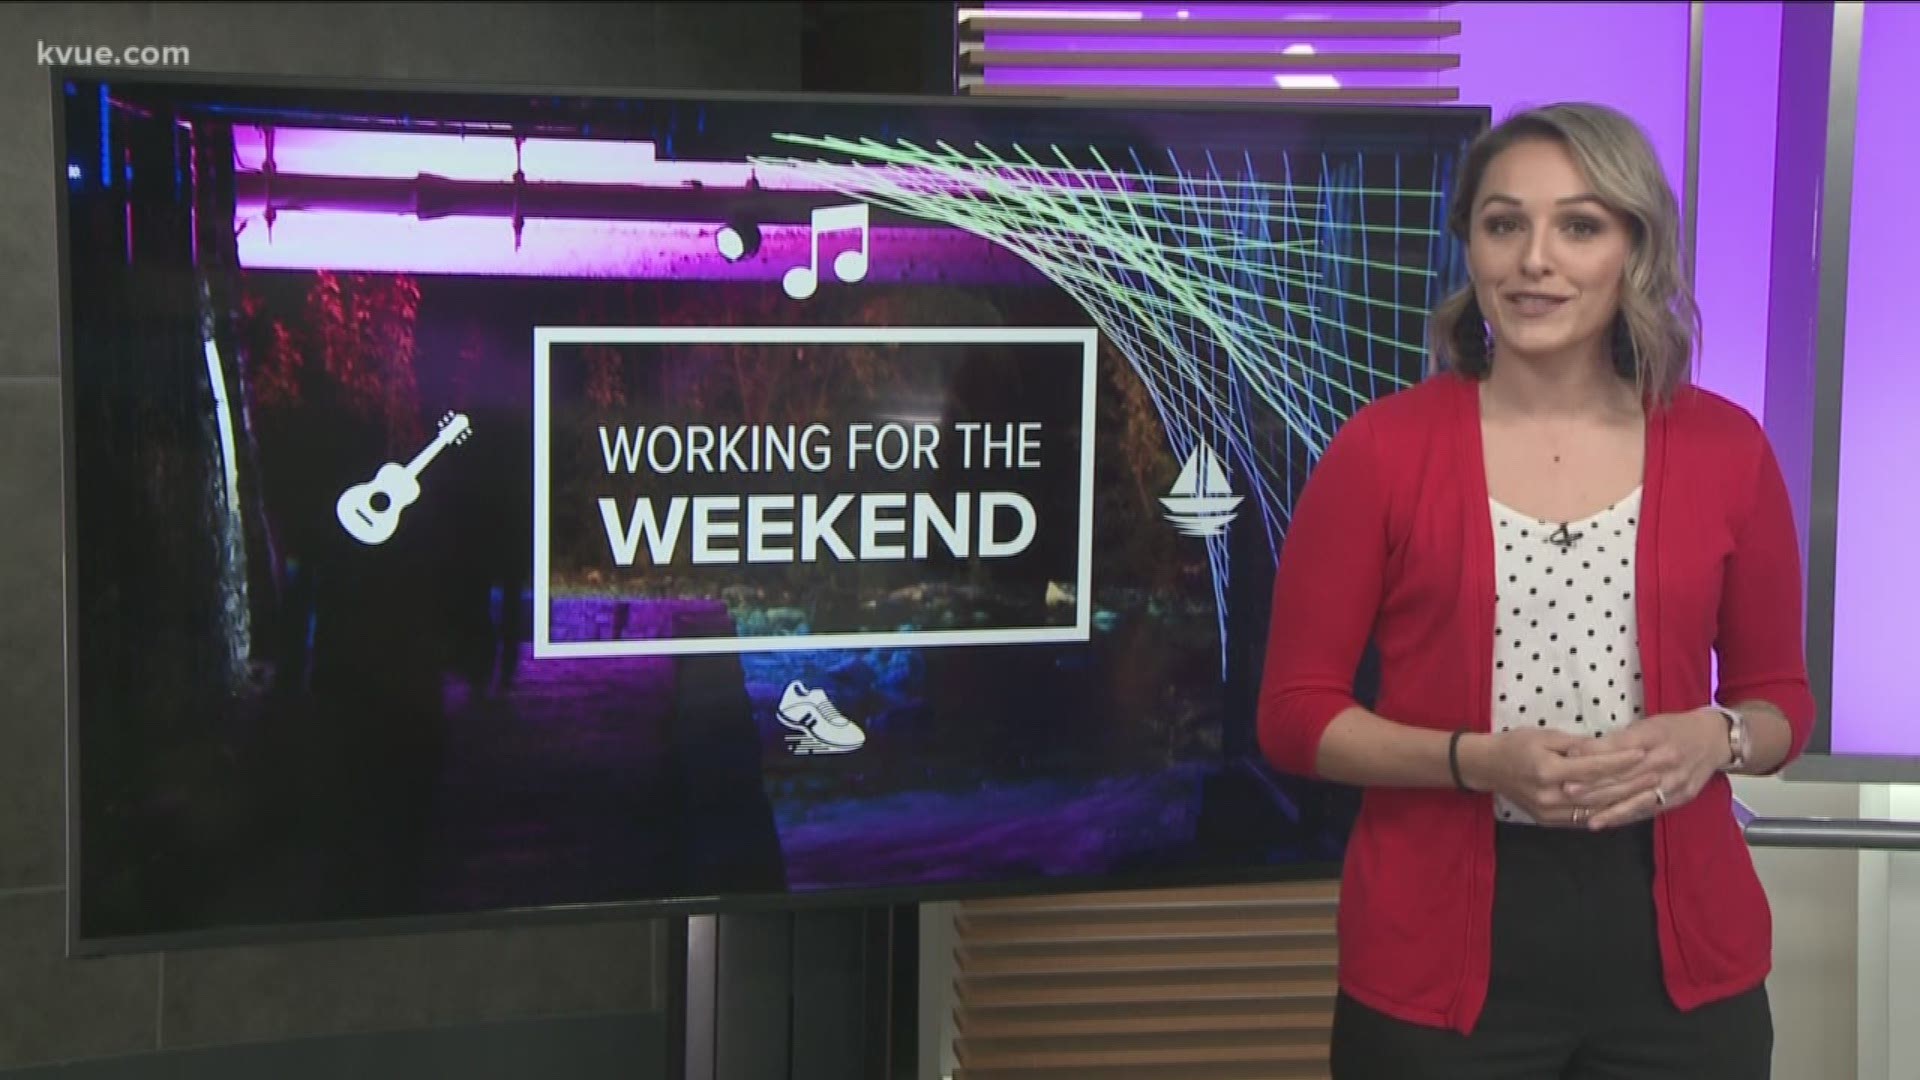 KVUE's Brittany Flowers shows us some of the fun events planned for the weekend.